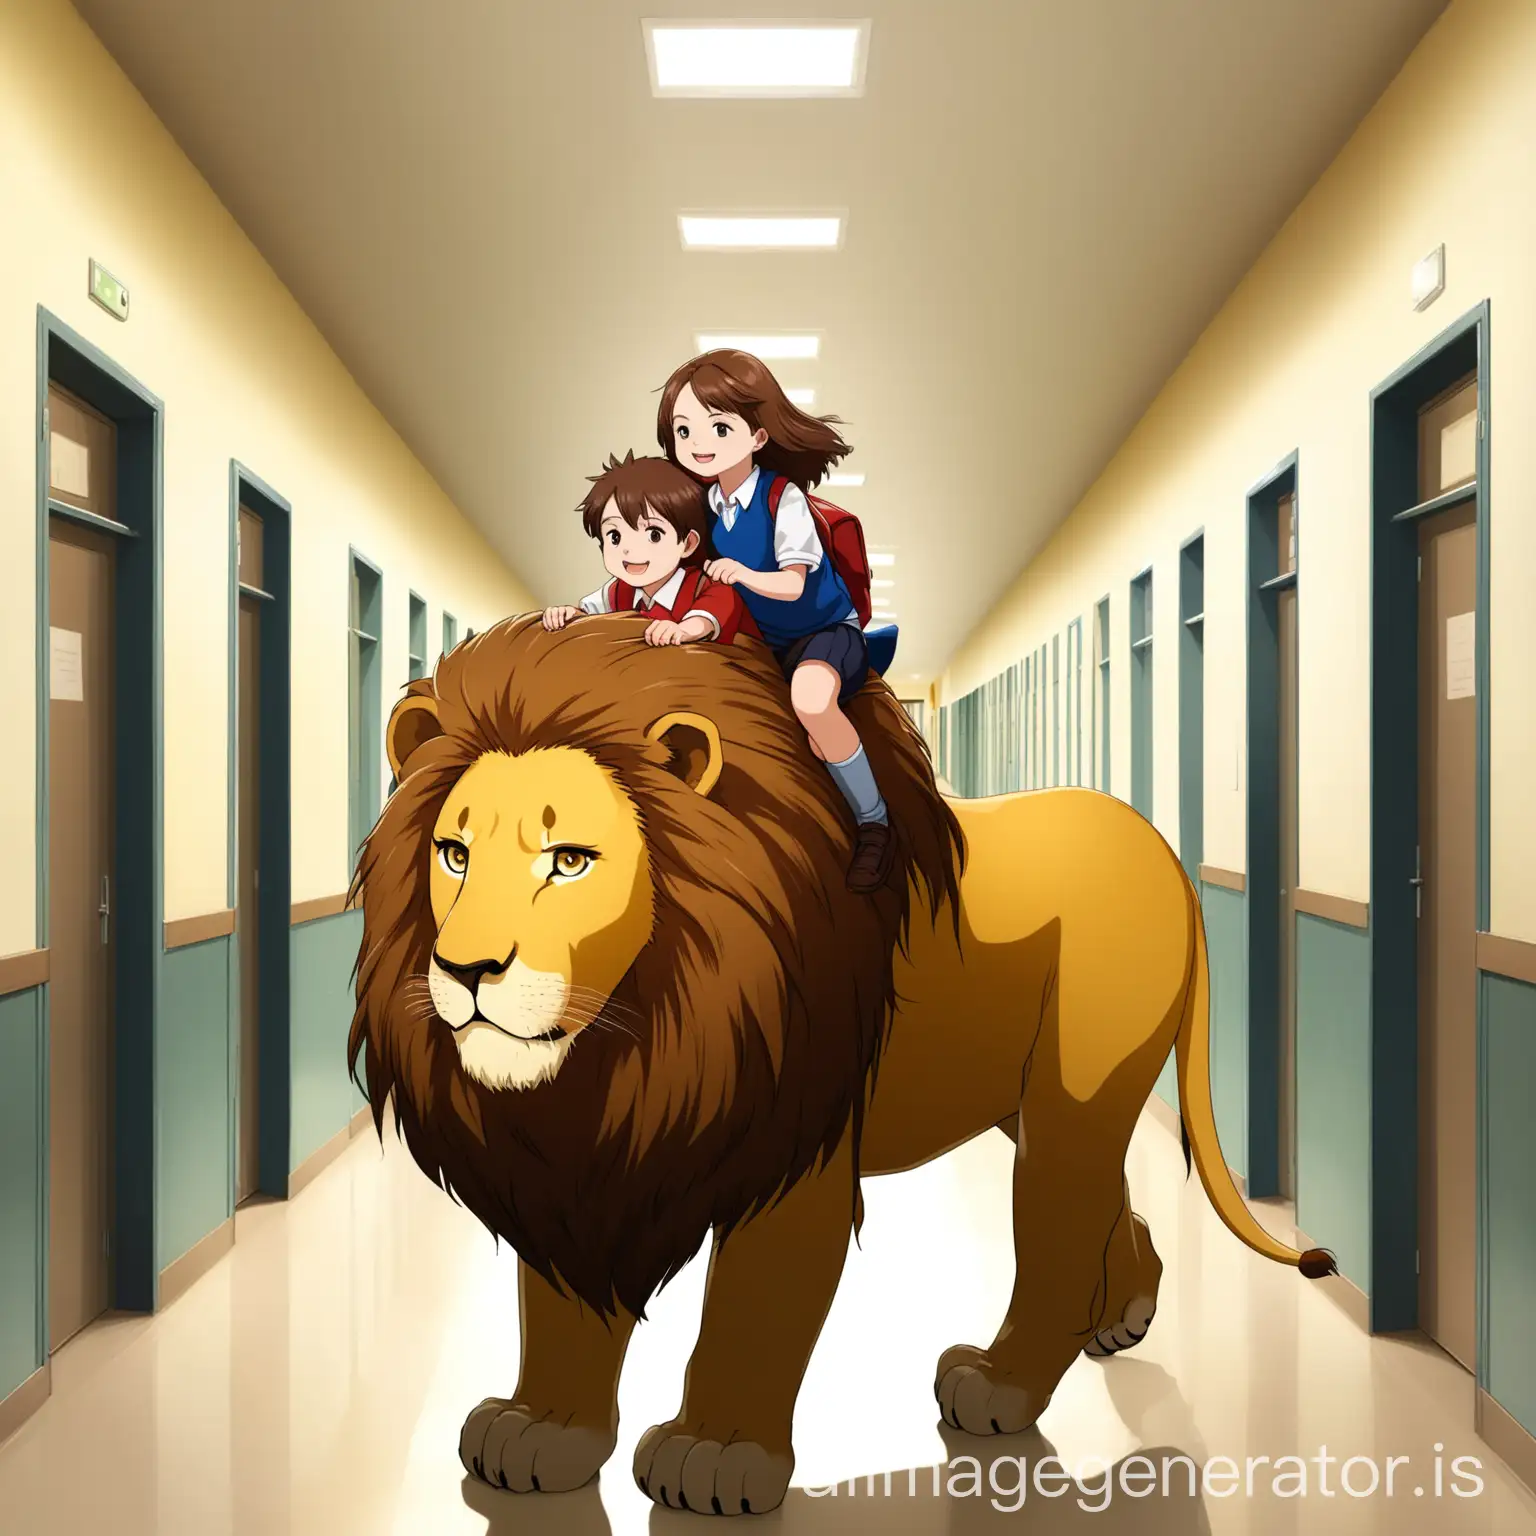 a little boy and a brown hair girl riding on the back of a huge lion in a school hallway